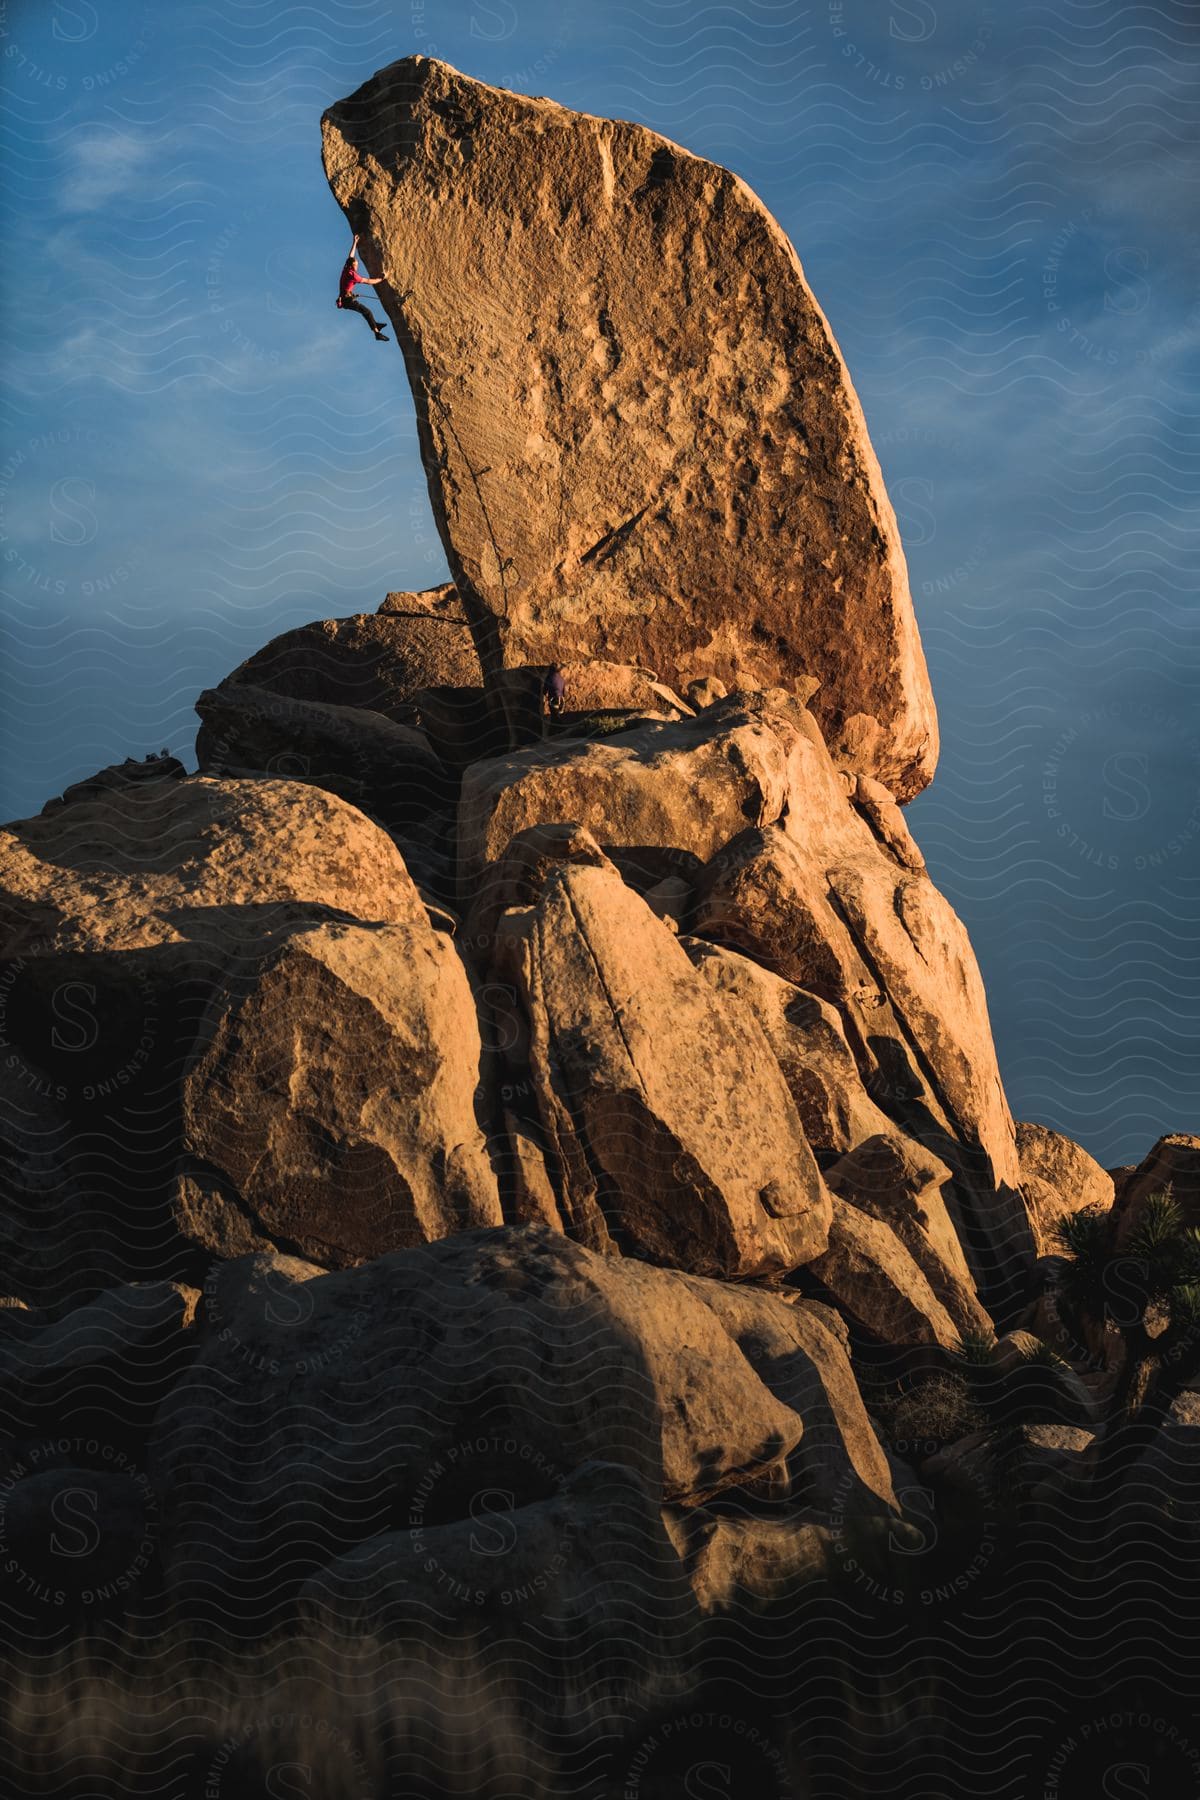 A mountain climber holds on to the side of a rock formation high in the air in joshua tree national park